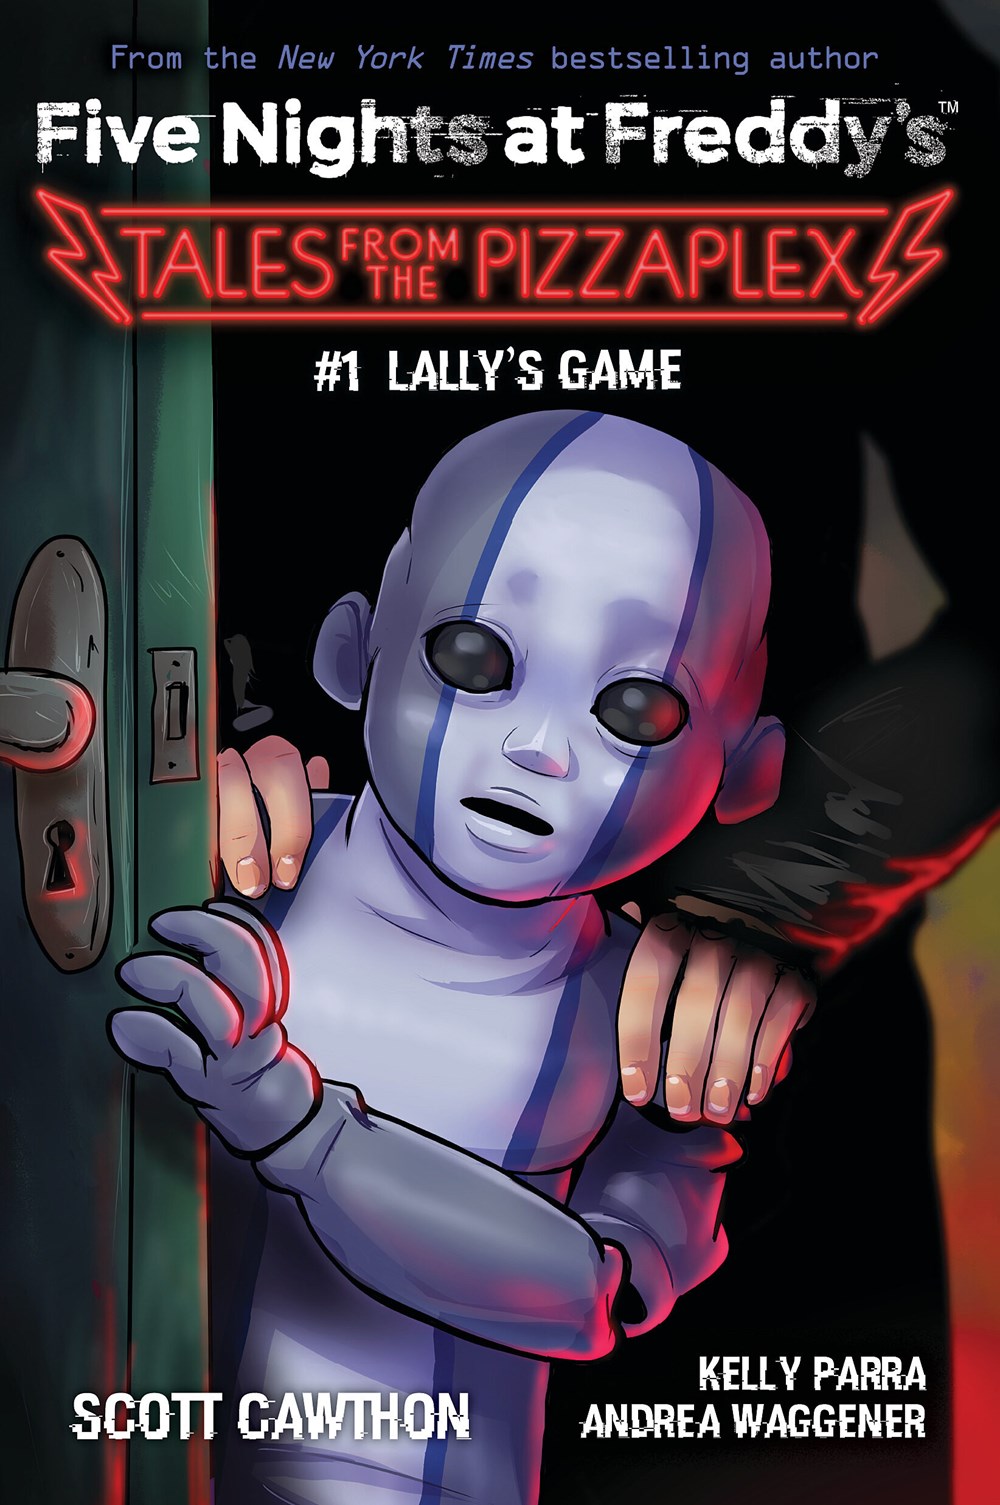 Five Nights At Freddy's Tales From The Pizzaplex Book 1 Lally's Game